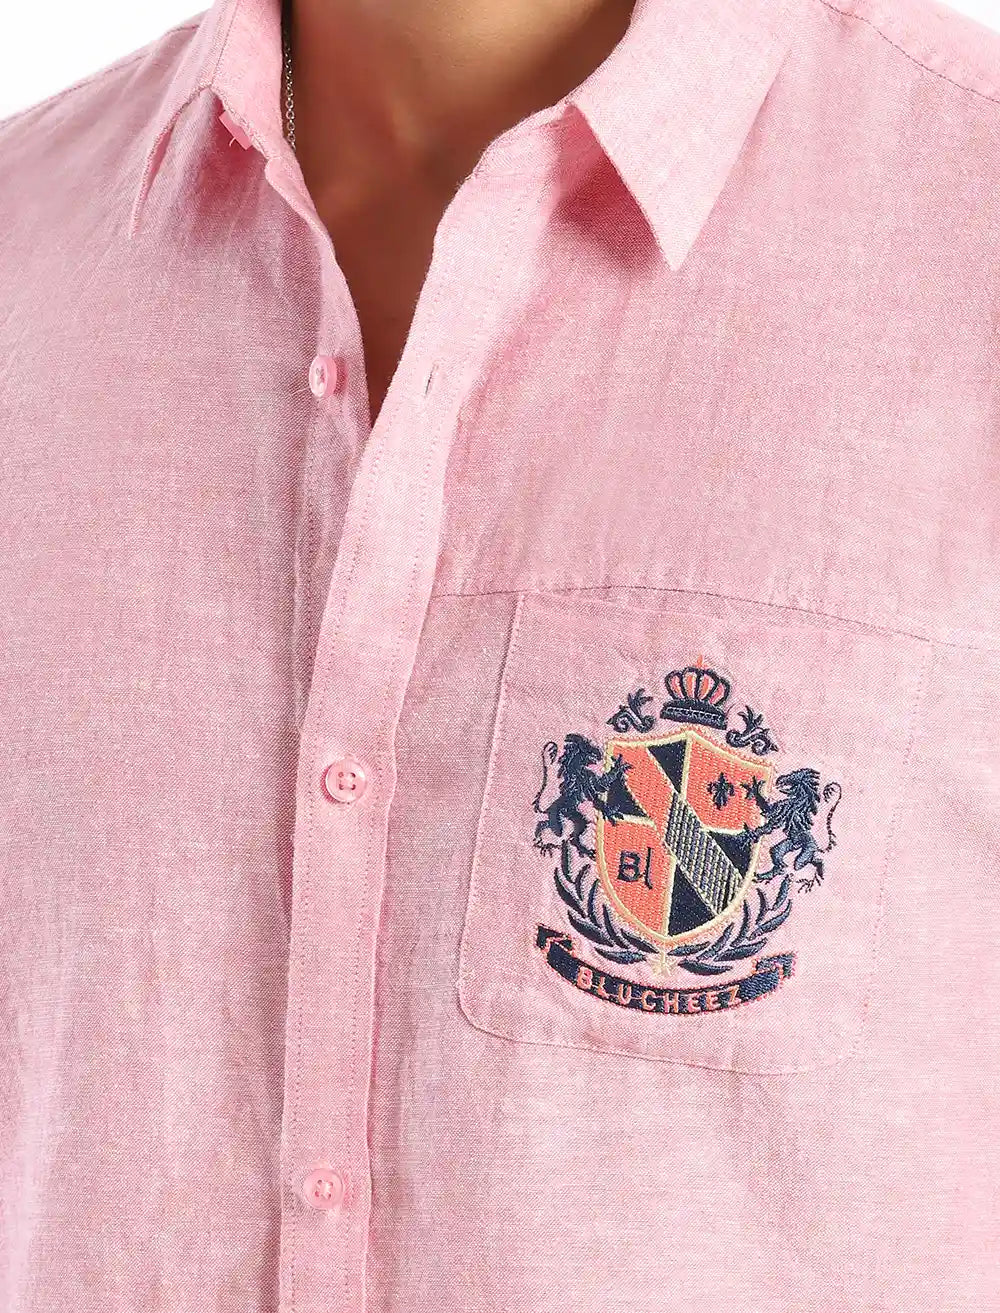 Men’s Limited Edition Casual Shirt